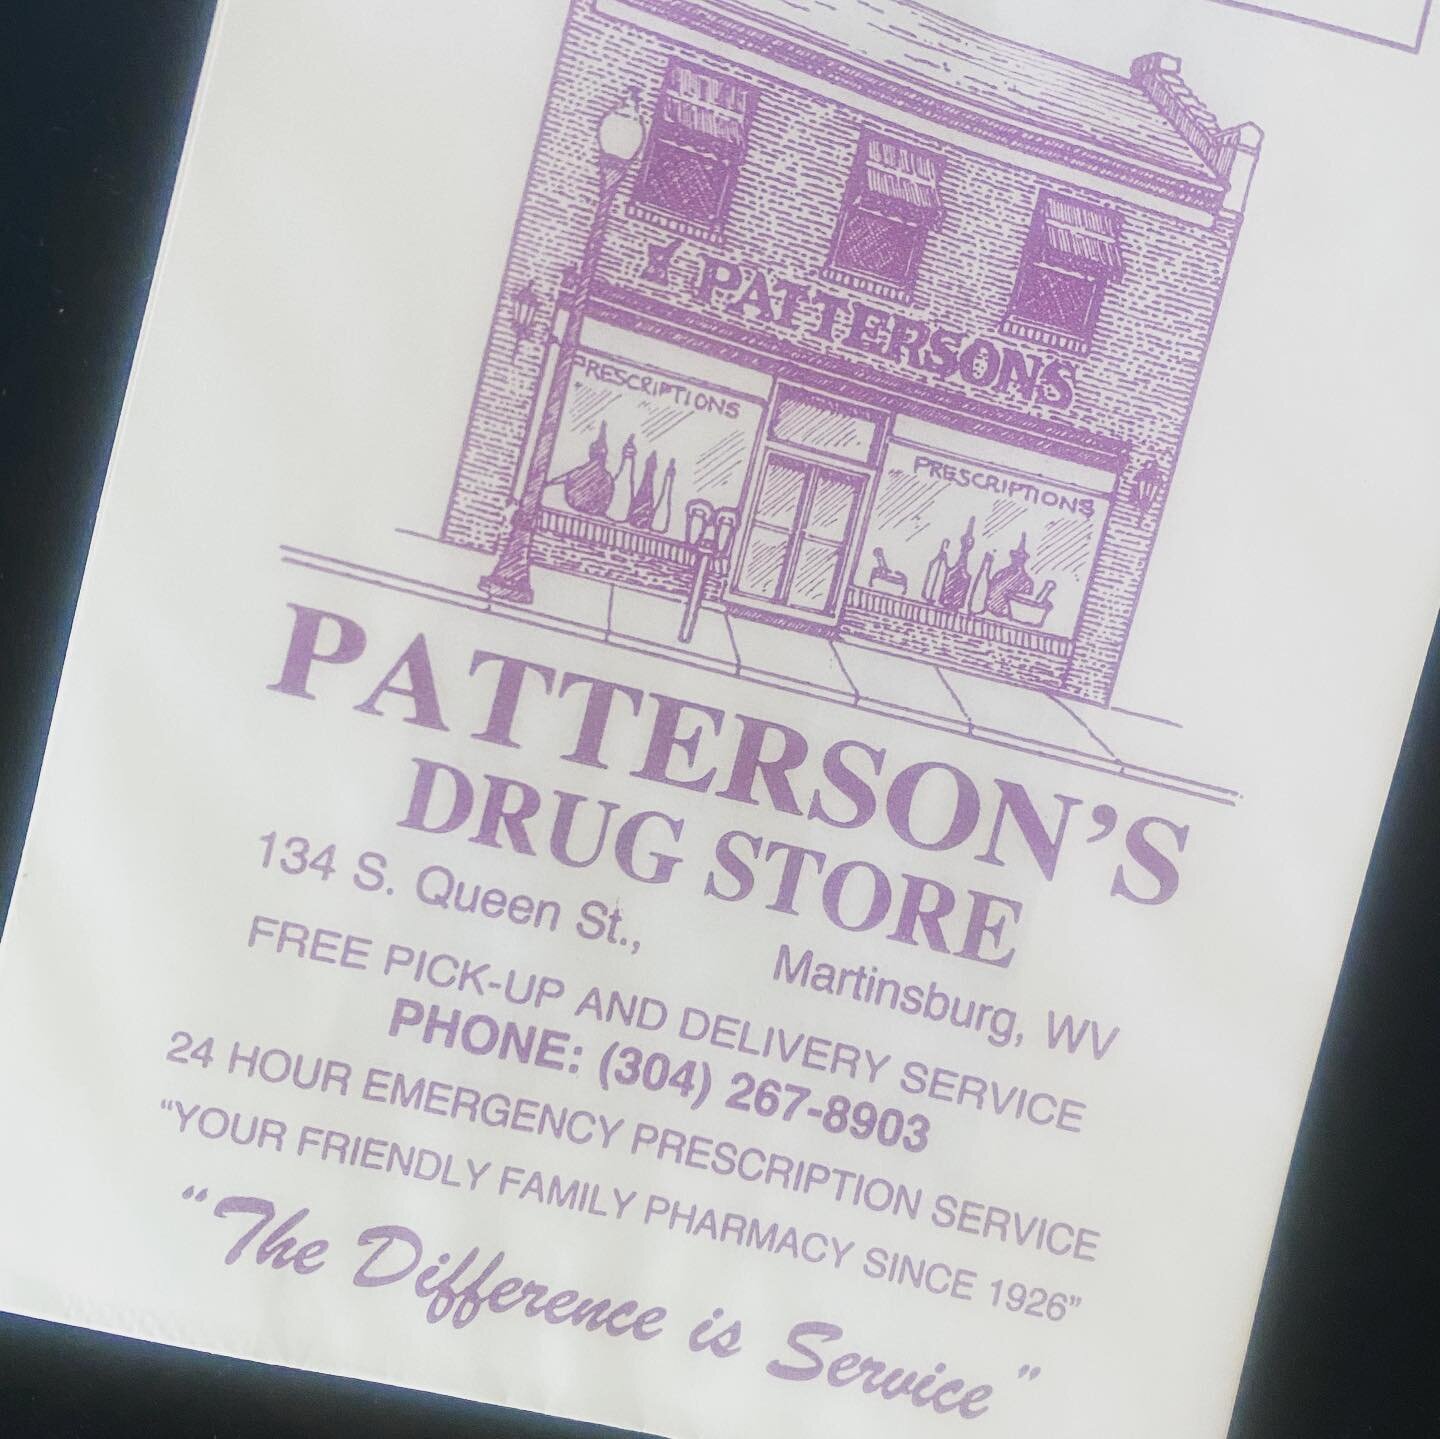 Patterson&rsquo;s purple bags really stand out with only one color and a classic storefront illustration design. Smart use of bag real estate! Did you know all of our bags have the style number printed on them to make re-ordering exactly what you nee